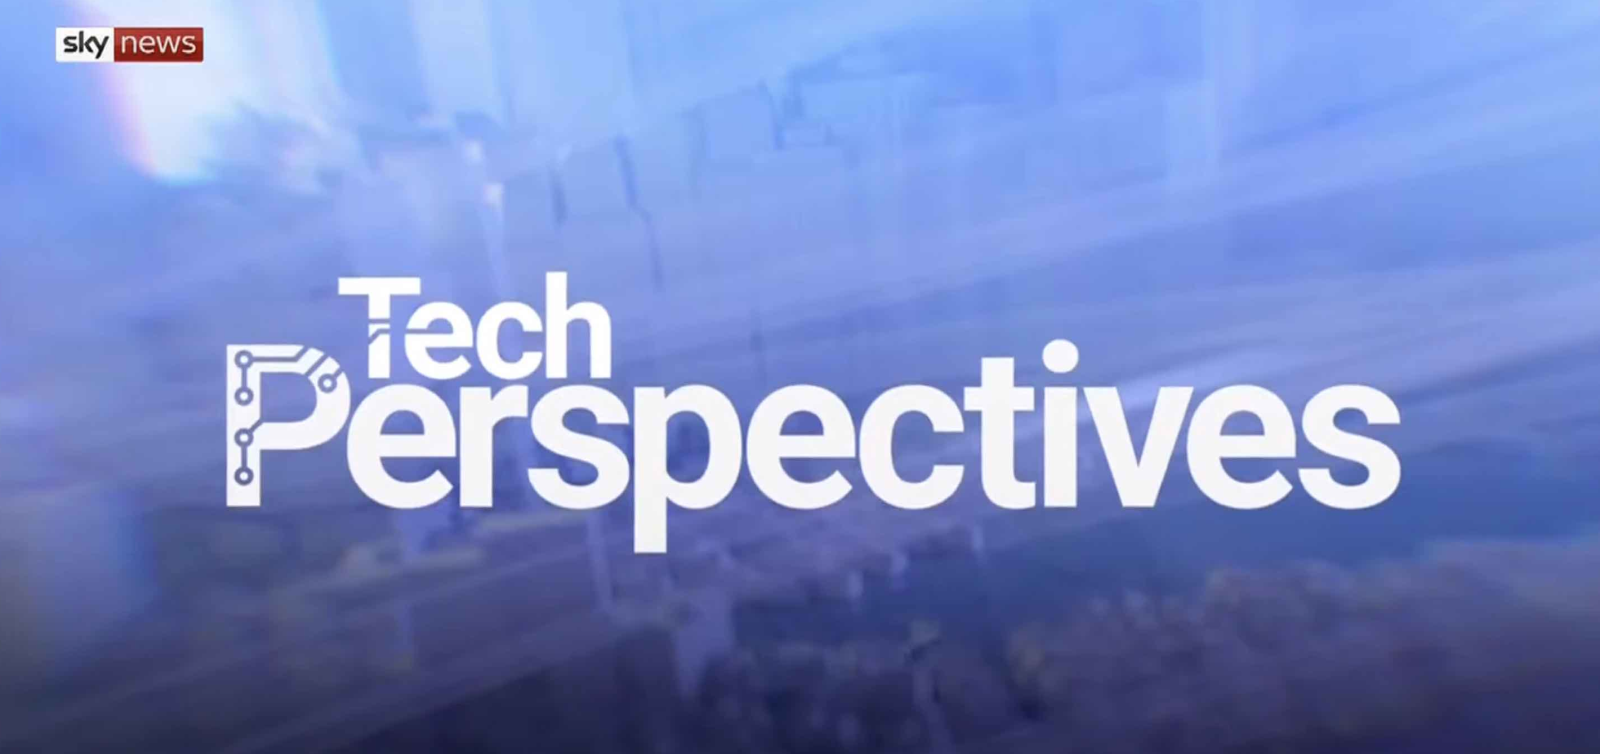 Tech Perspectives Show on Sky News